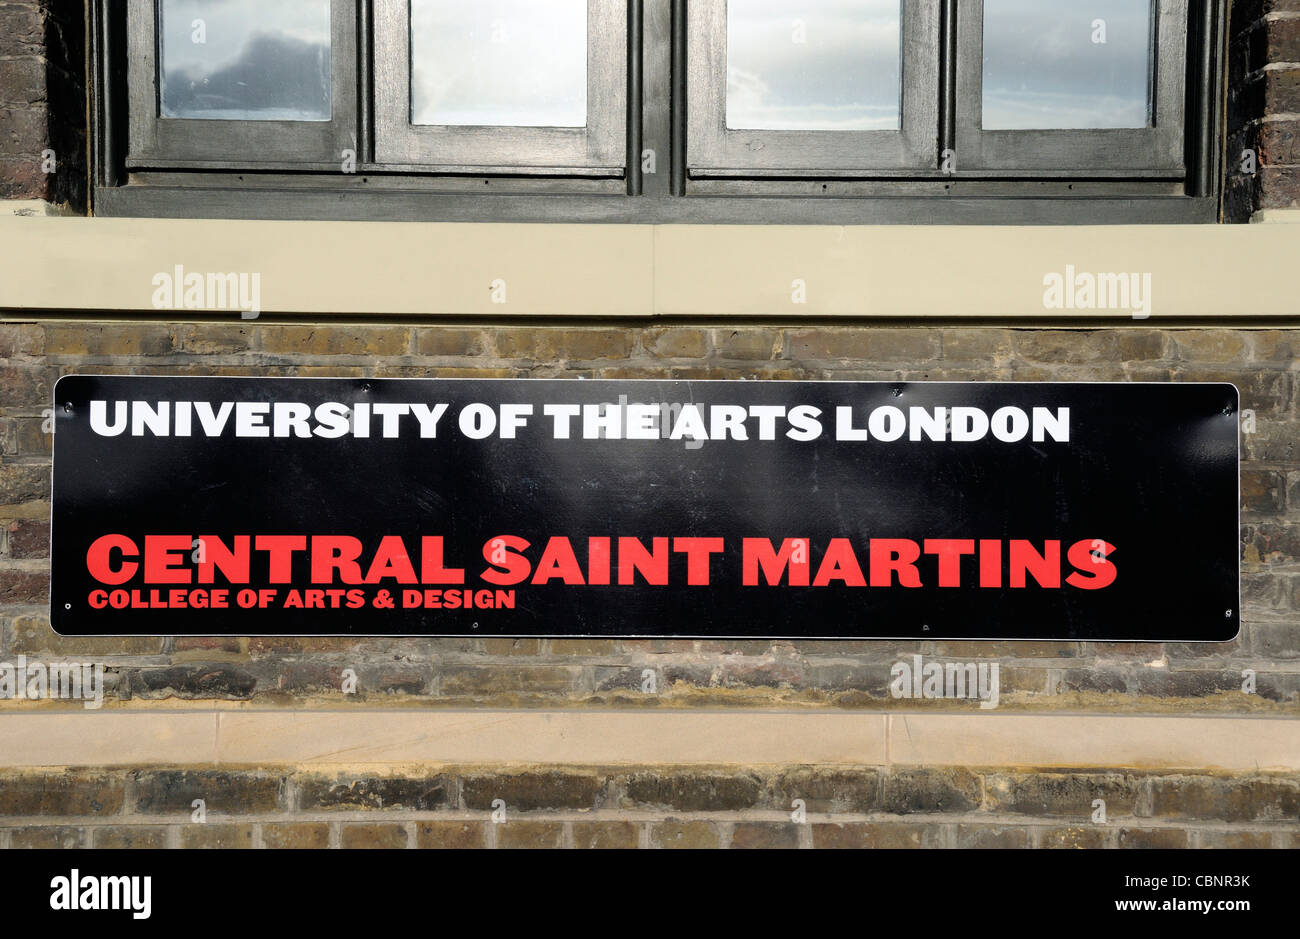 Central Saint Martins, College of Arts & Design University of the Arts London sign Kings Cross Central N1C London England UK Stock Photo